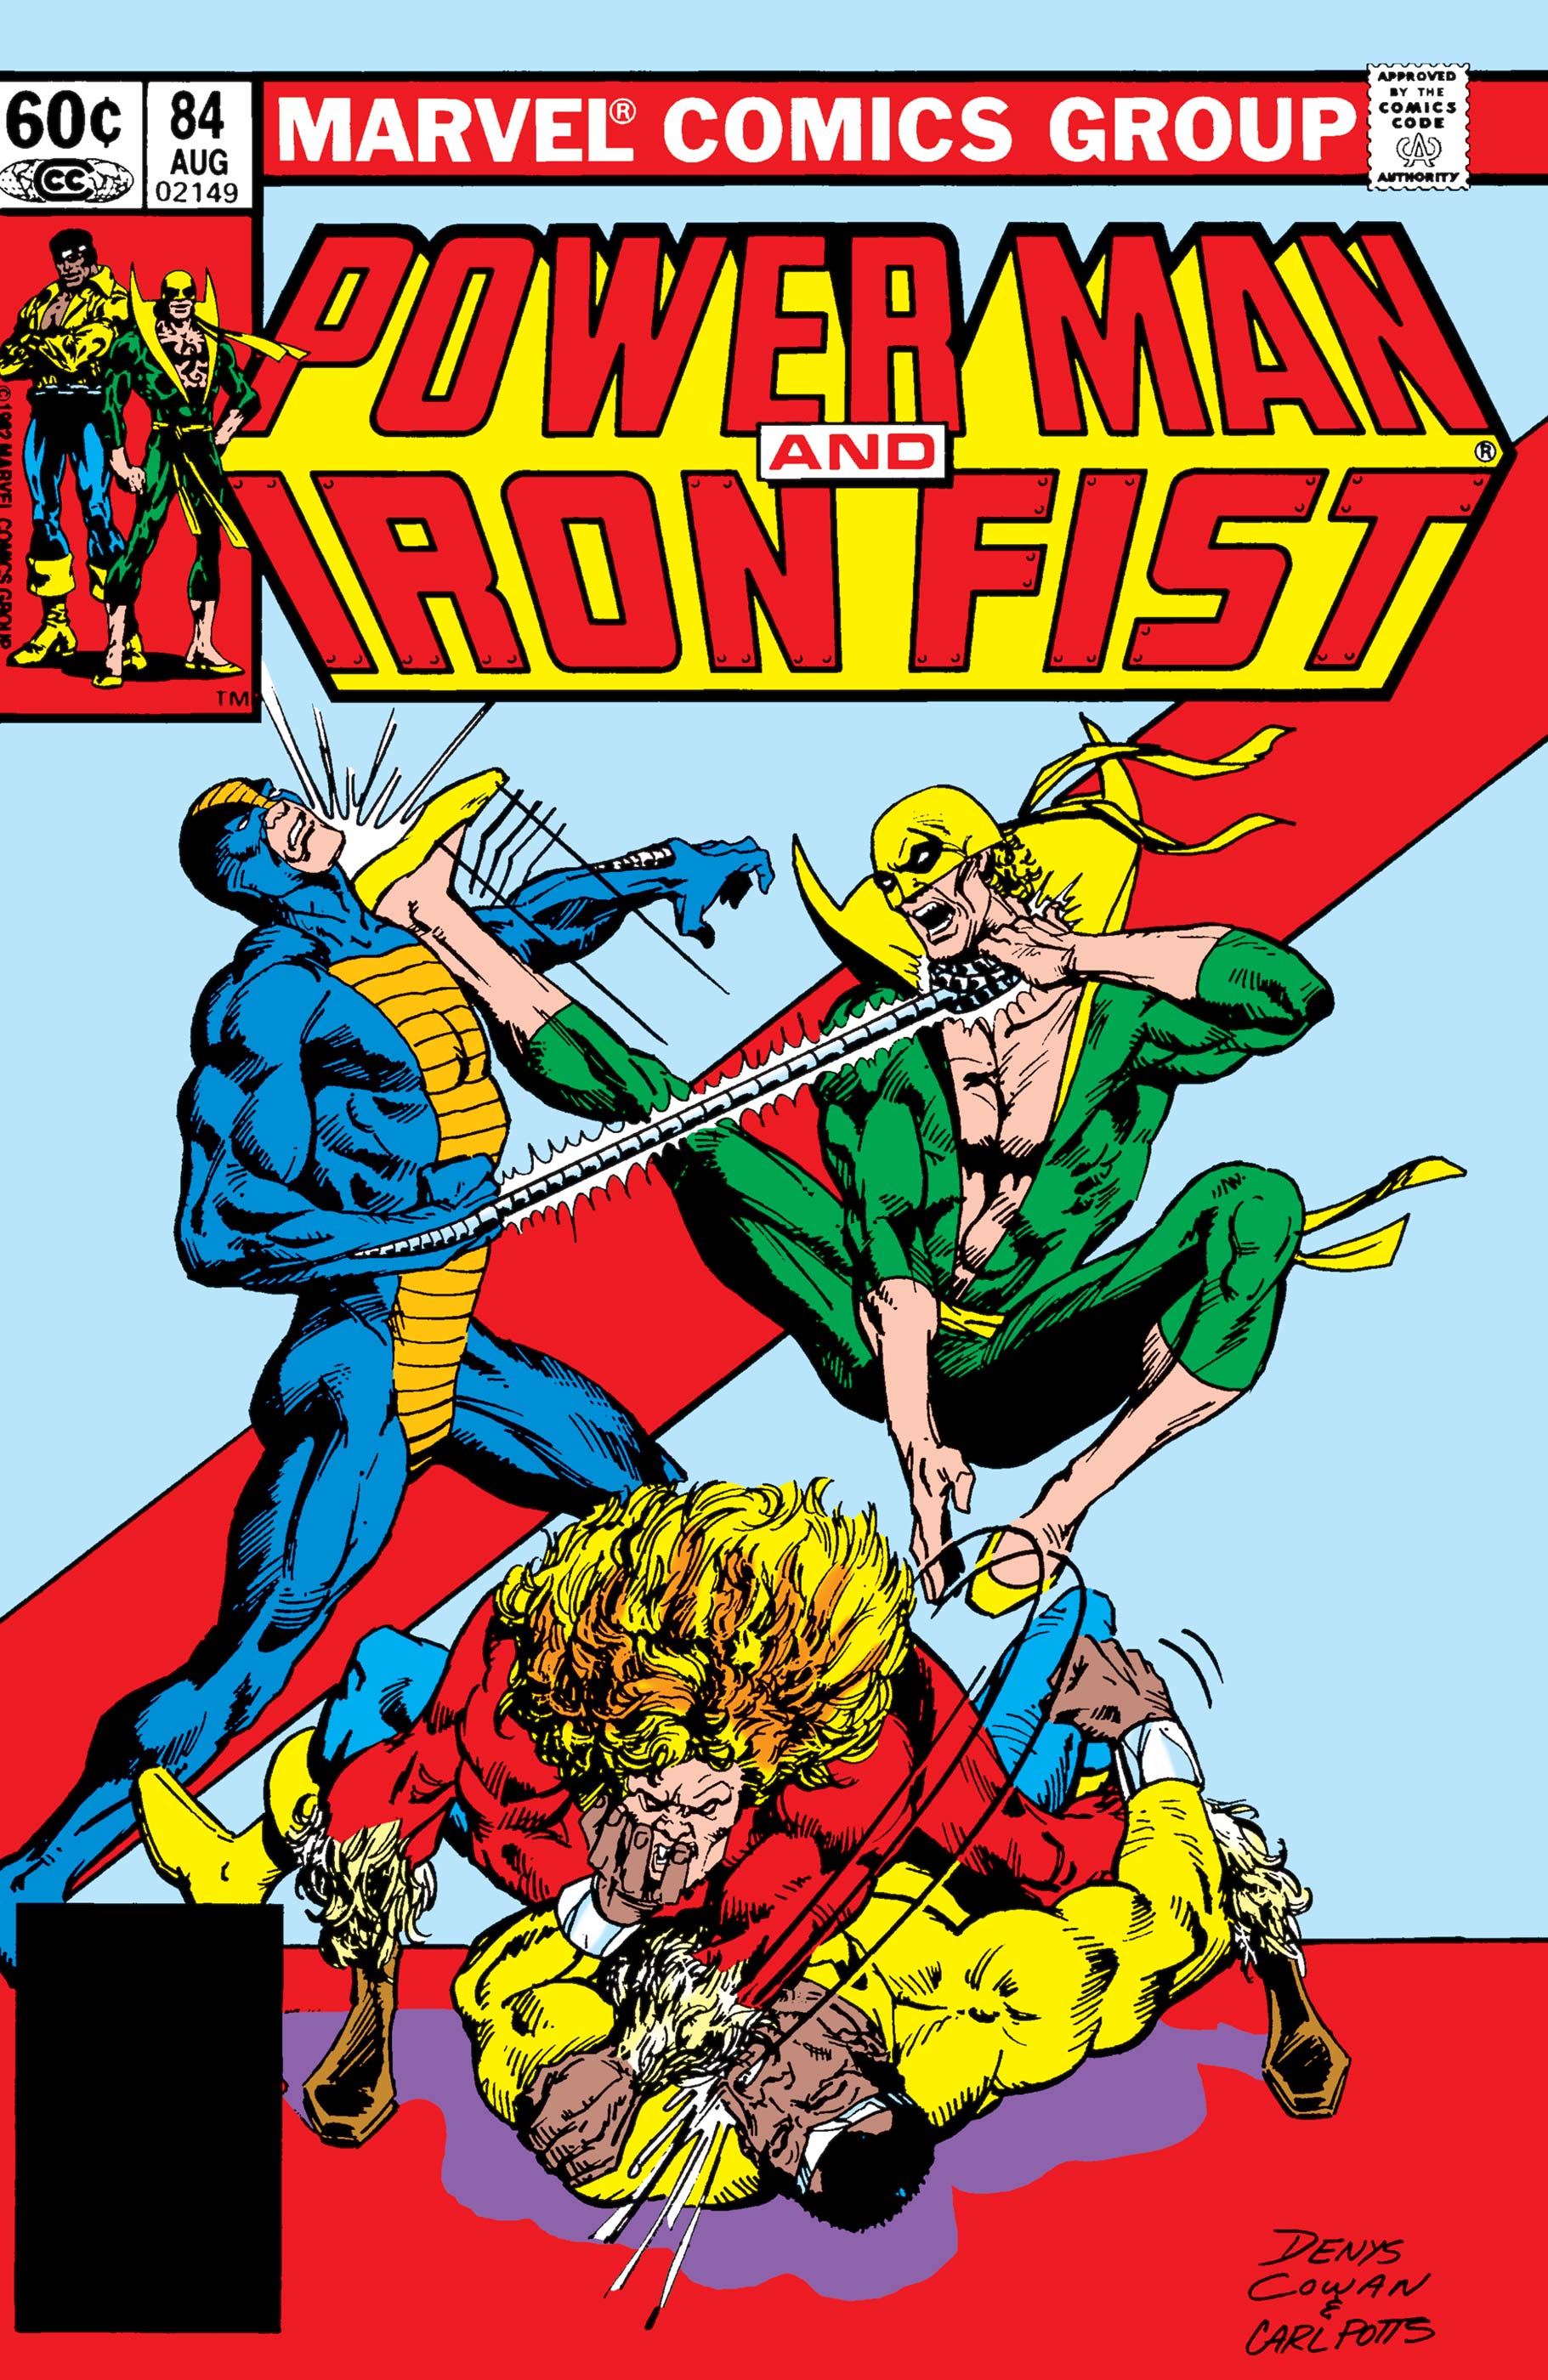 Power Man and Iron Fist (1978) #84